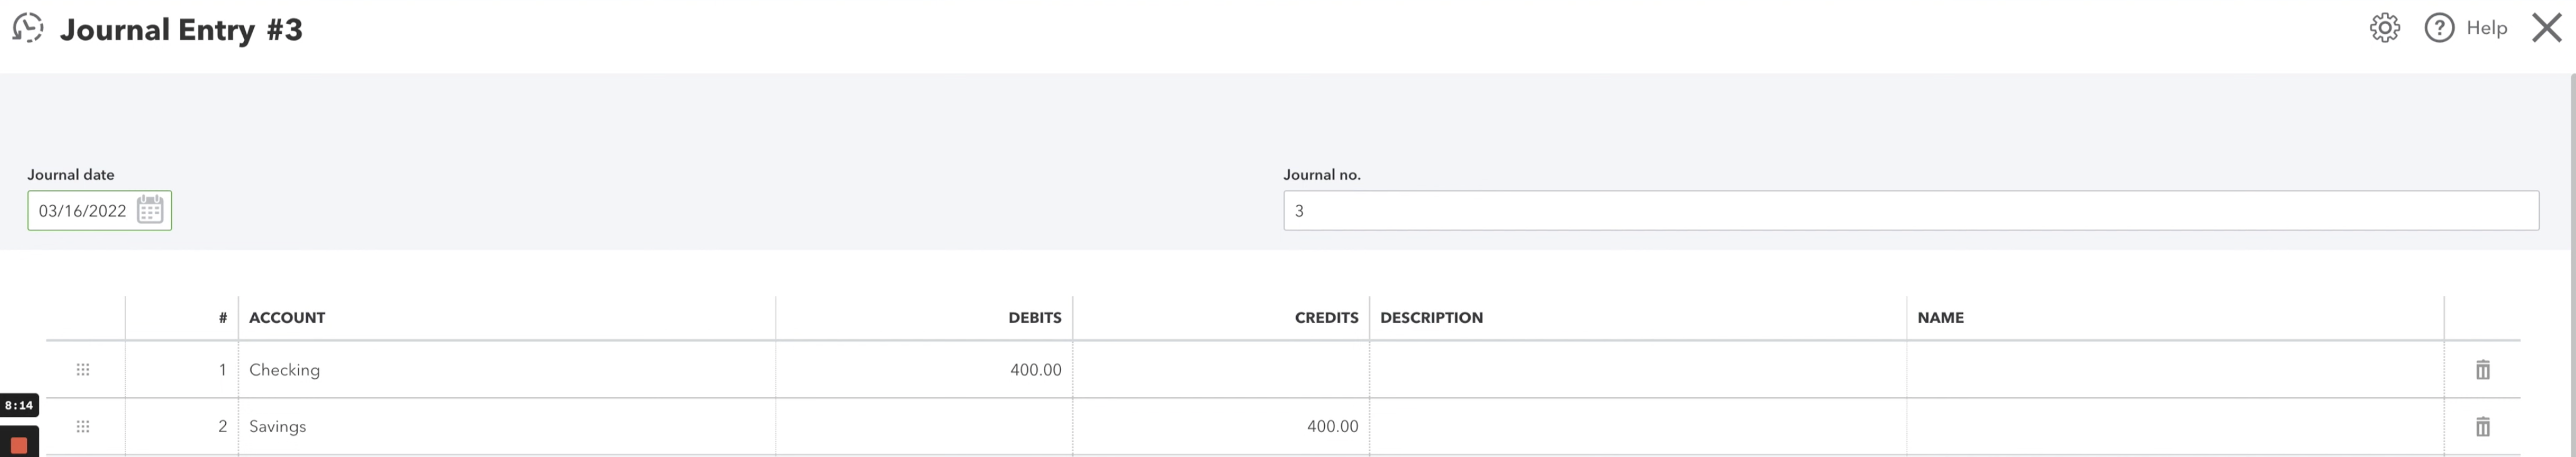 entering in all the journal entry details in quickbooks online